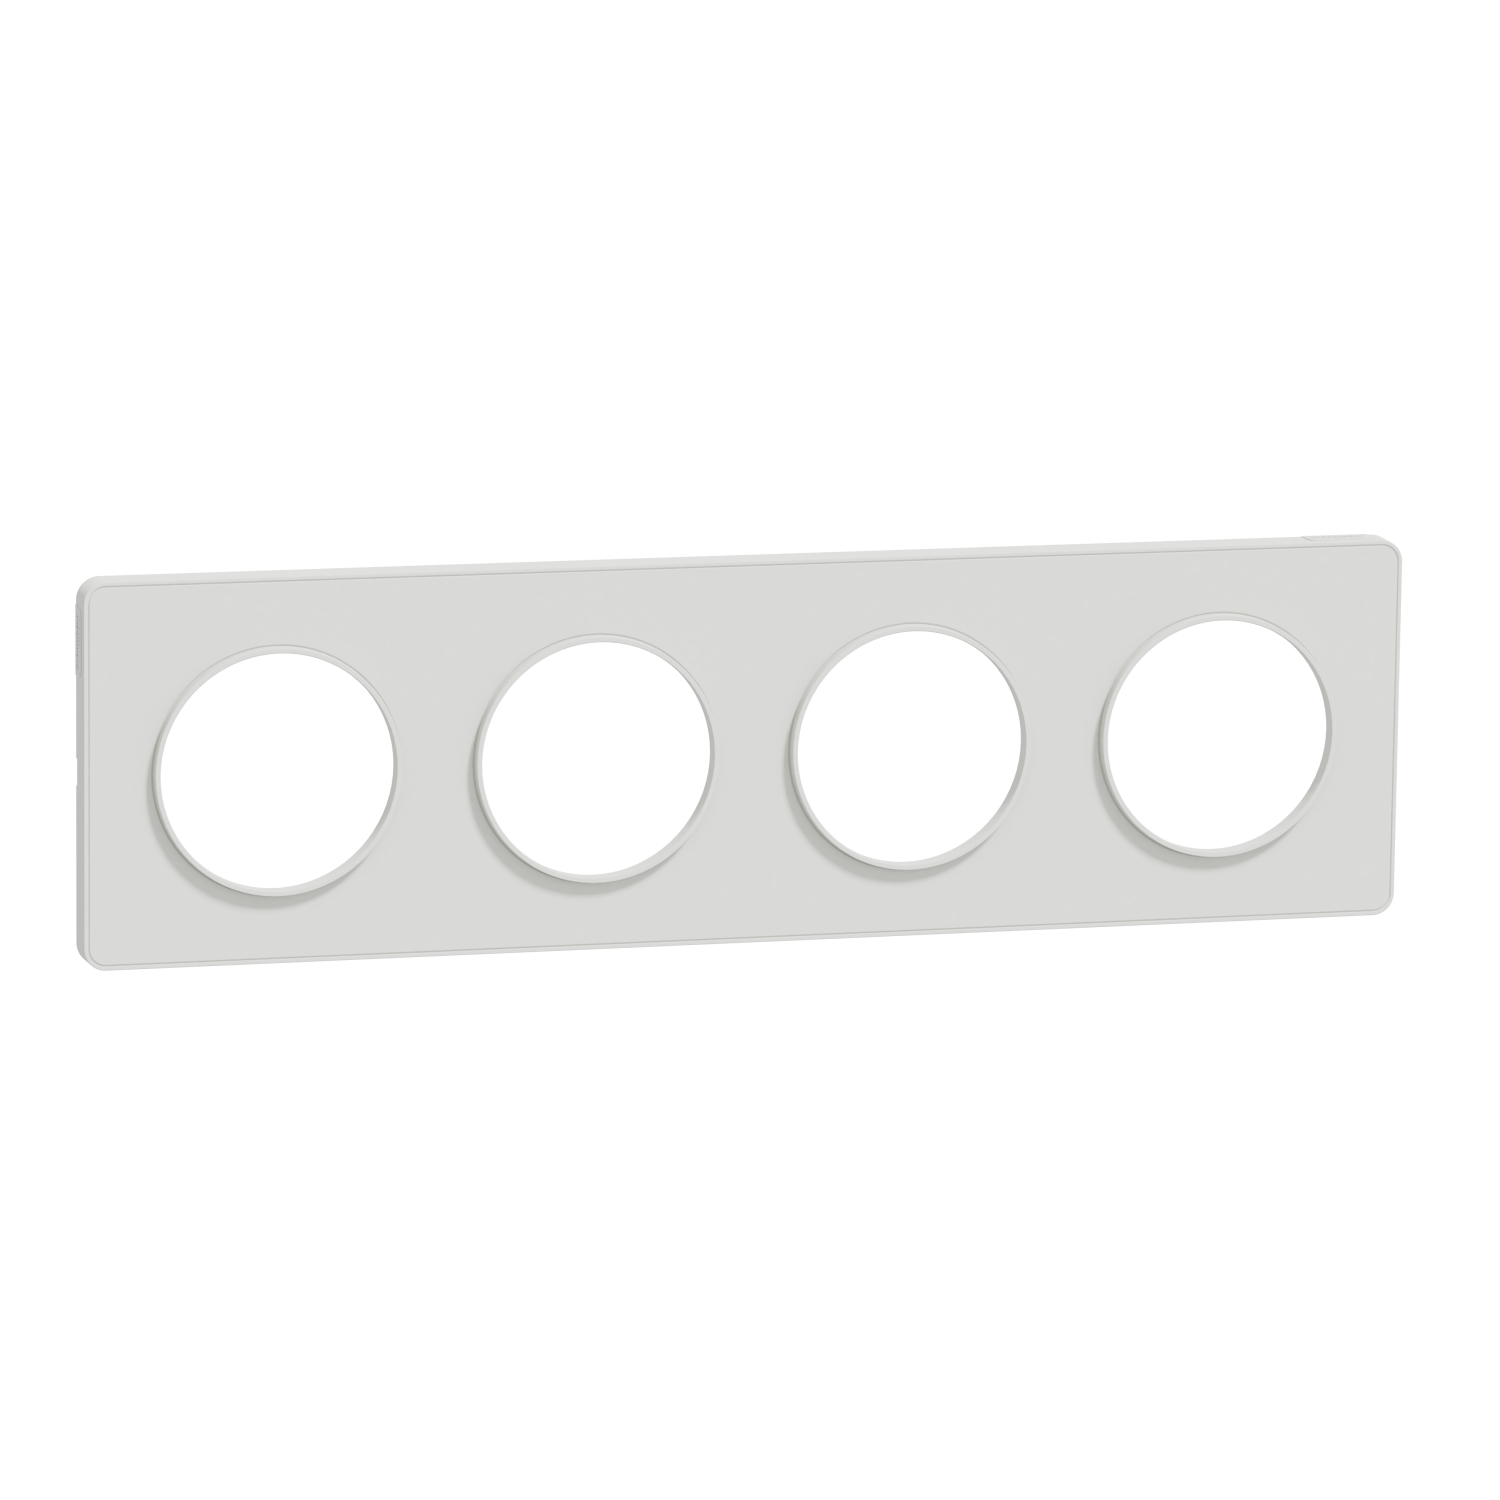 Plaque ODACE Touch blanc 4 postes horizontal/vertical entraxe 71mm - SCHNEIDER ELECTRIC - S520808